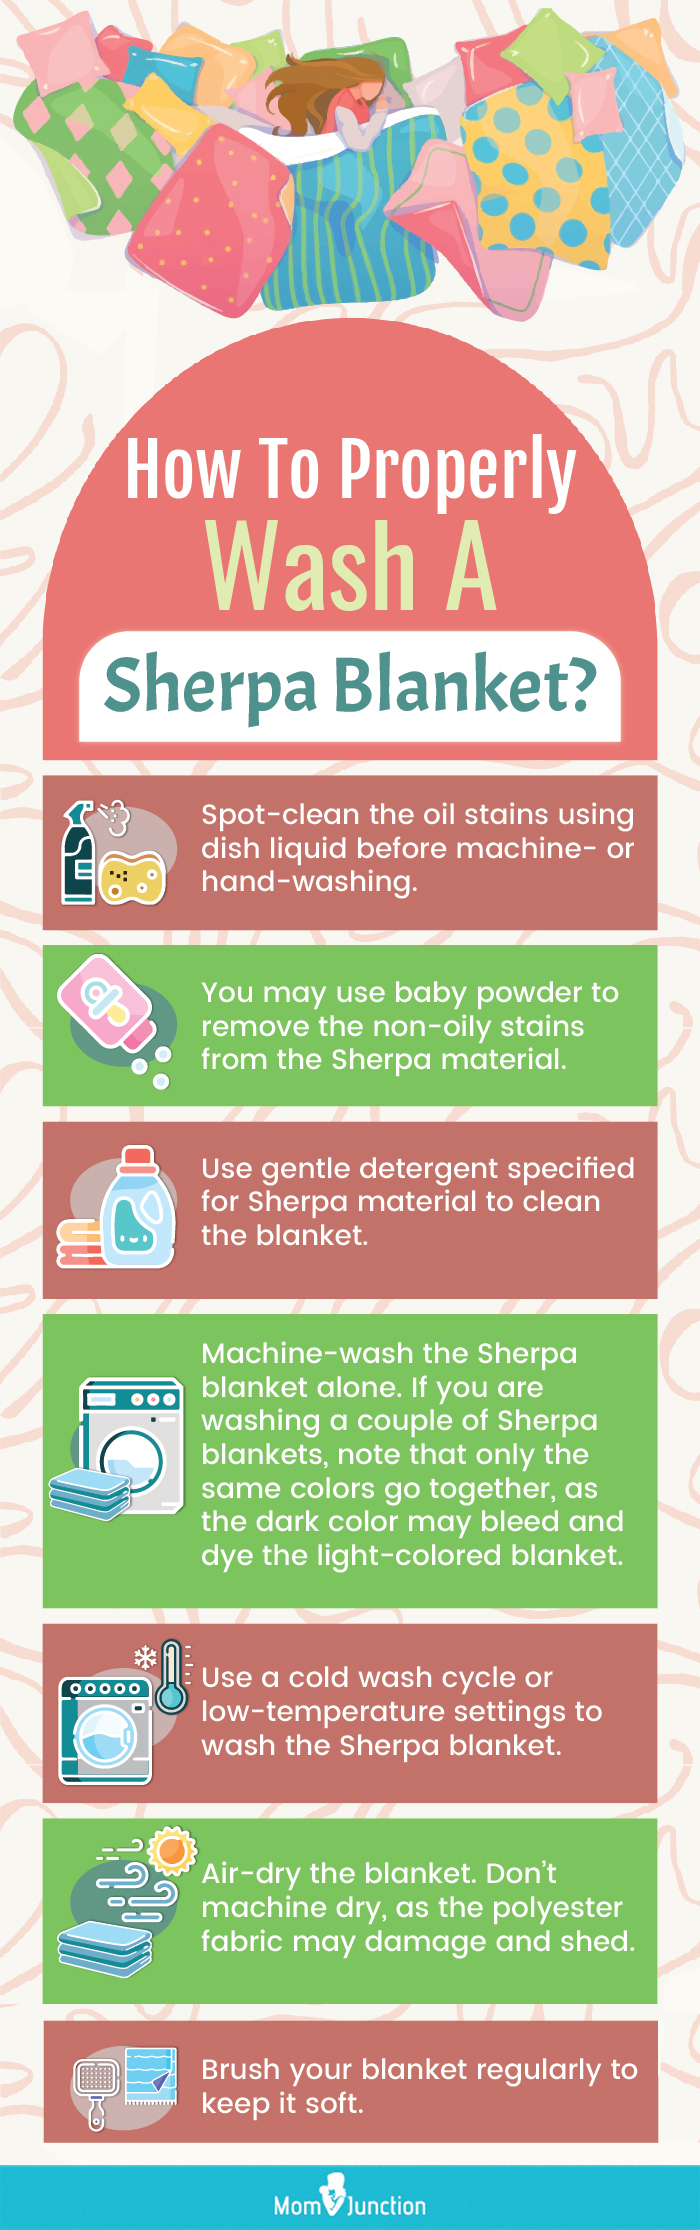 How To Properly Wash A Sherpa Blanket